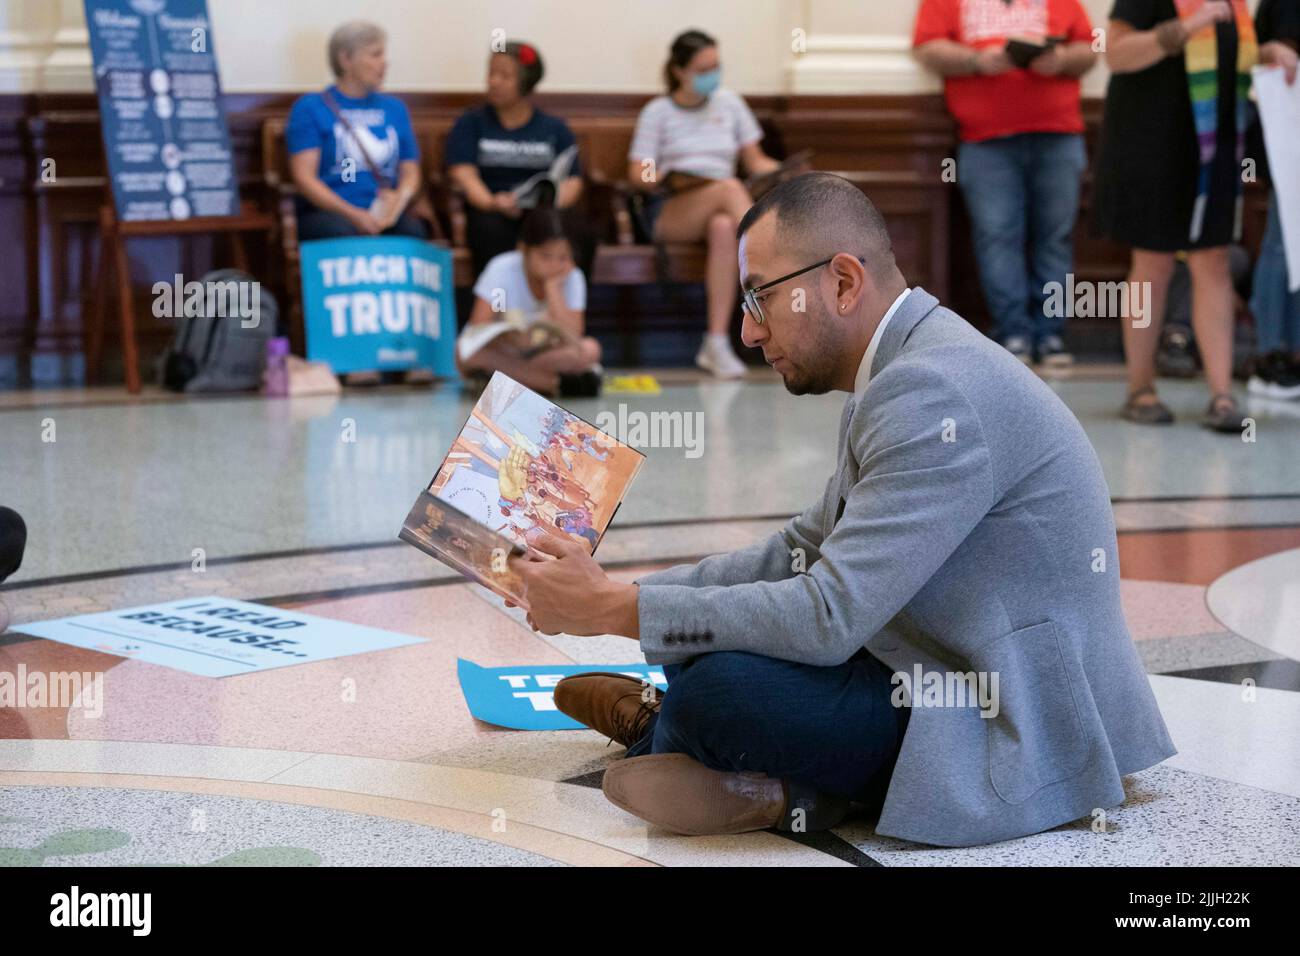 Austin Texas USA, July 26, 2022: RICARDO MARTINEZ of Equality Texas joins other activists protesting book censorship in public school classrooms and libraries. Protesters sat in the Capitol rotunda and read some of the 850 books listed on a Republican lawmaker's list of 'uncomfortable' titles. Credit: Bob Daemmrich/Alamy Live News Stock Photo